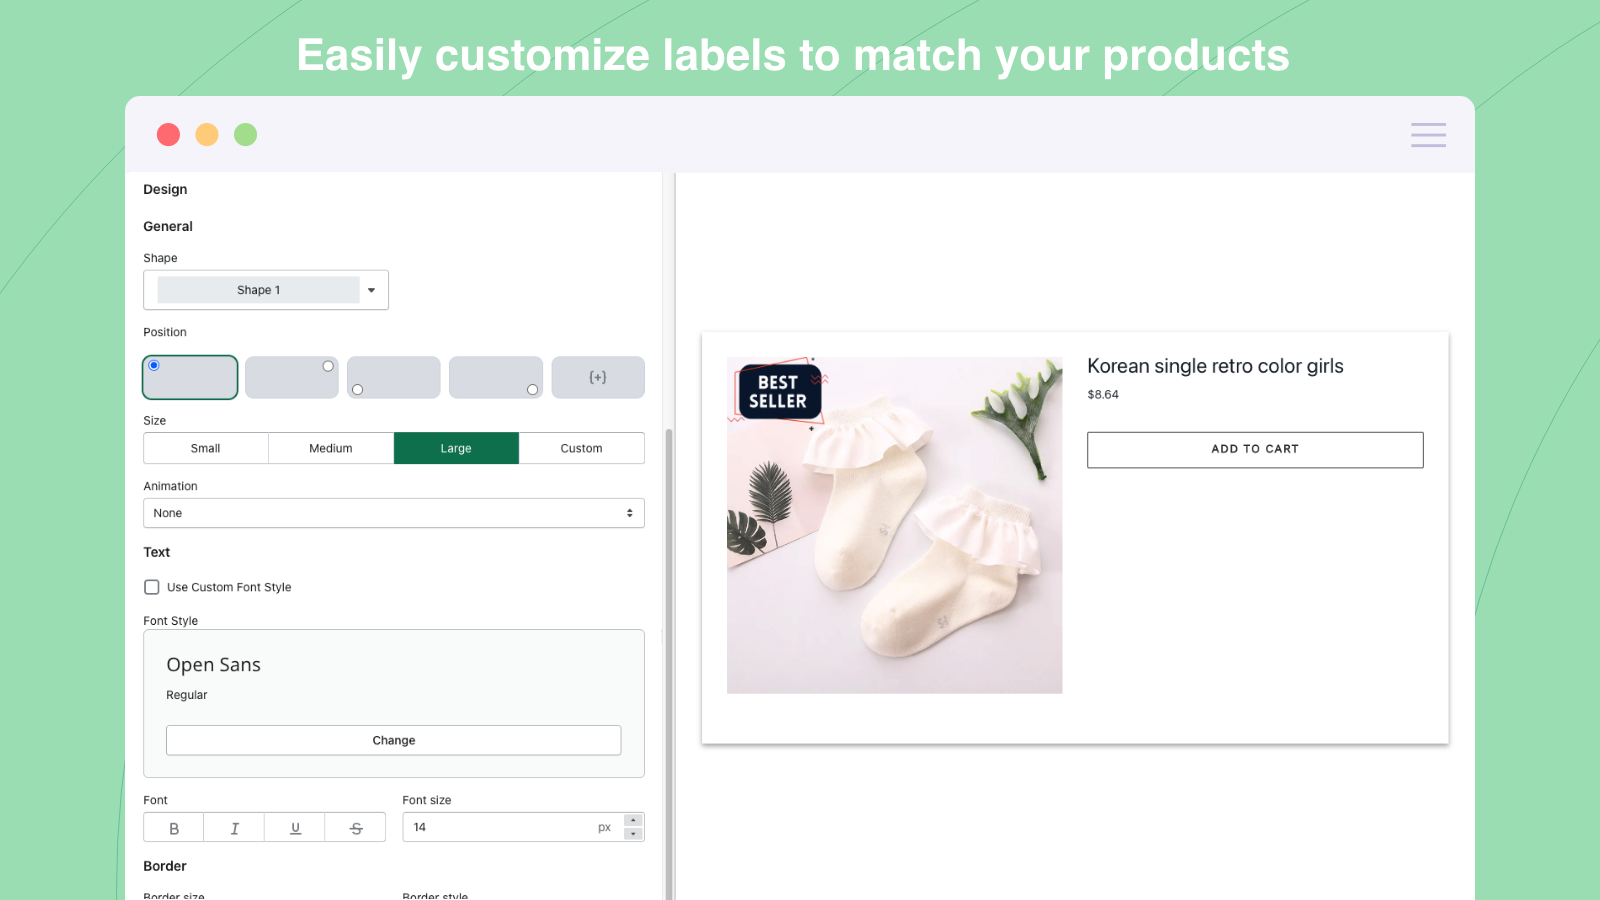 Easy to customize product labels/badge to match your products